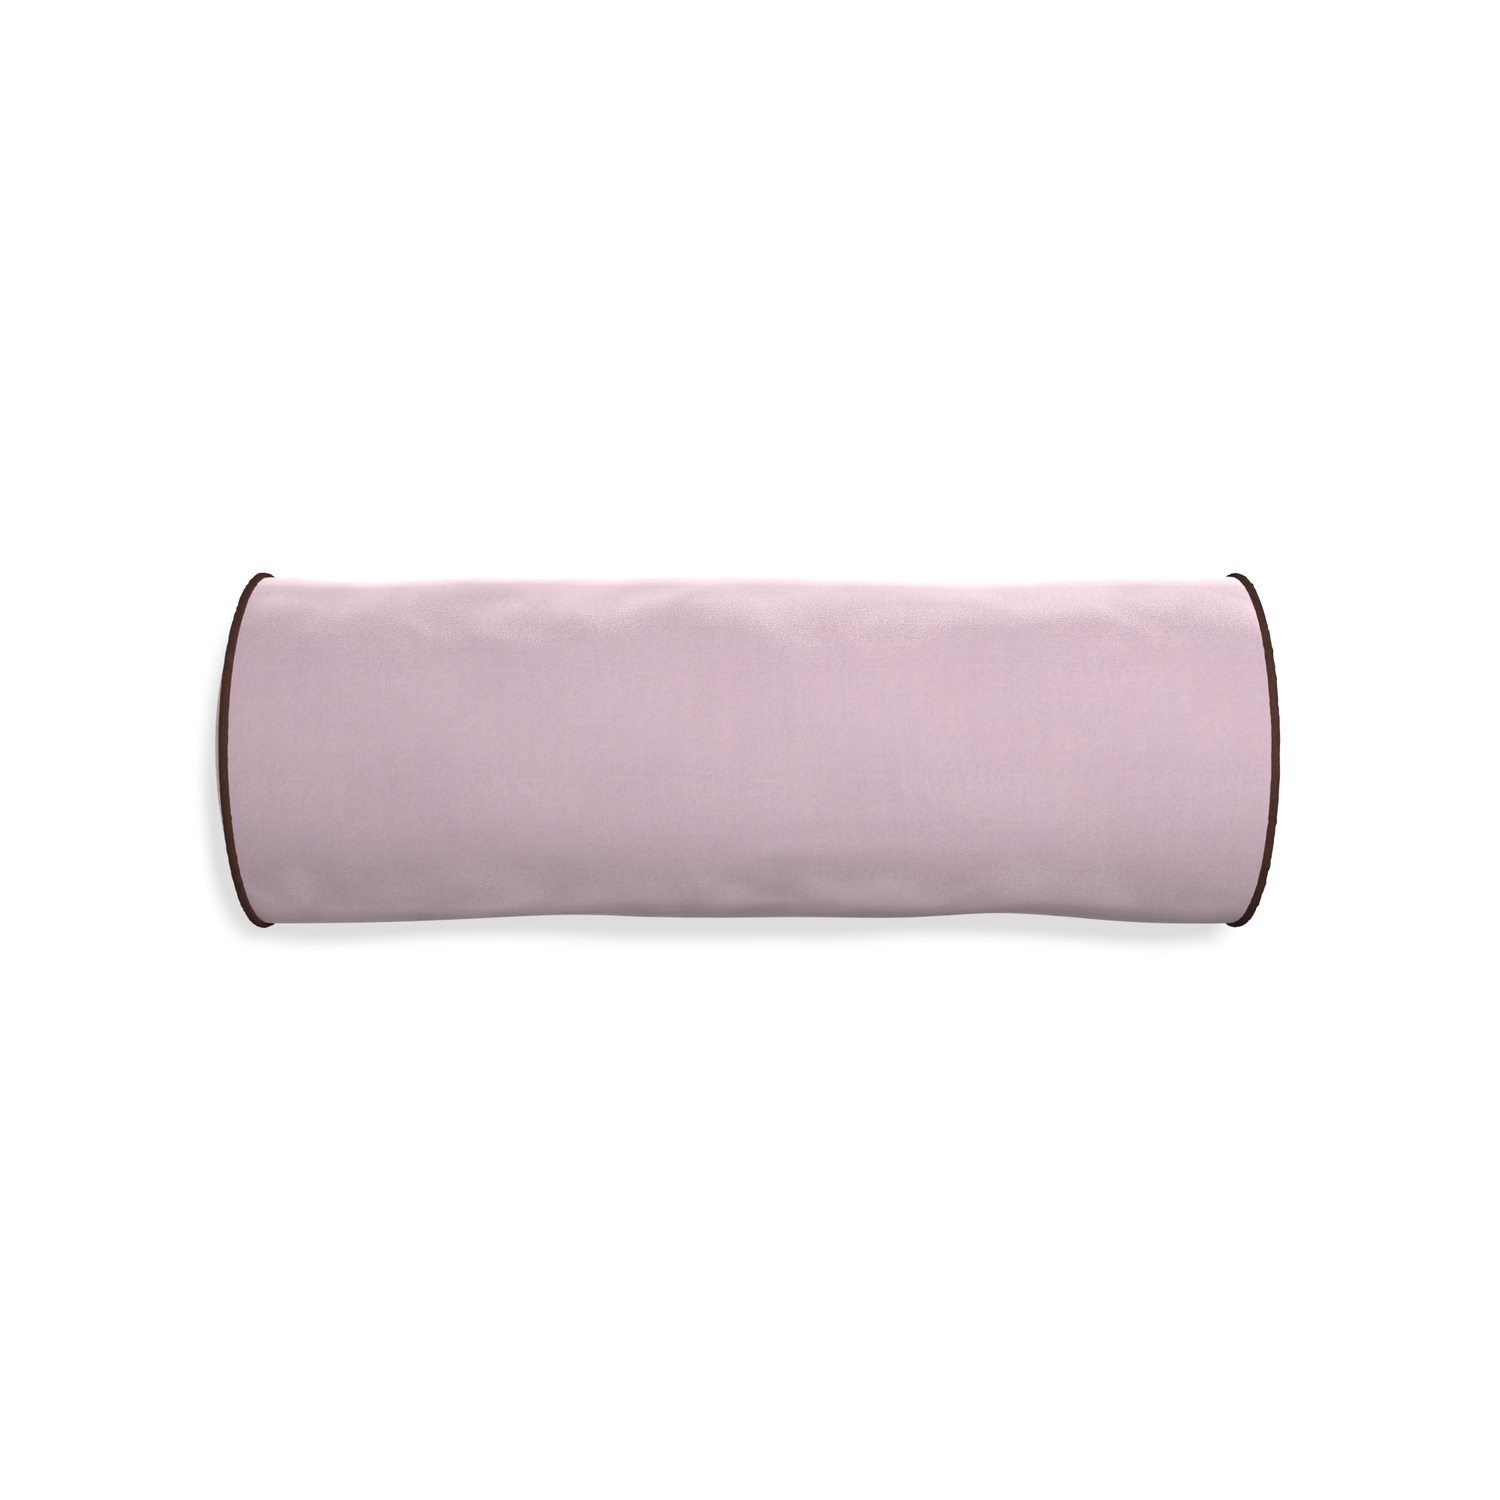 rectangle lilac velvet pillow with brown piping